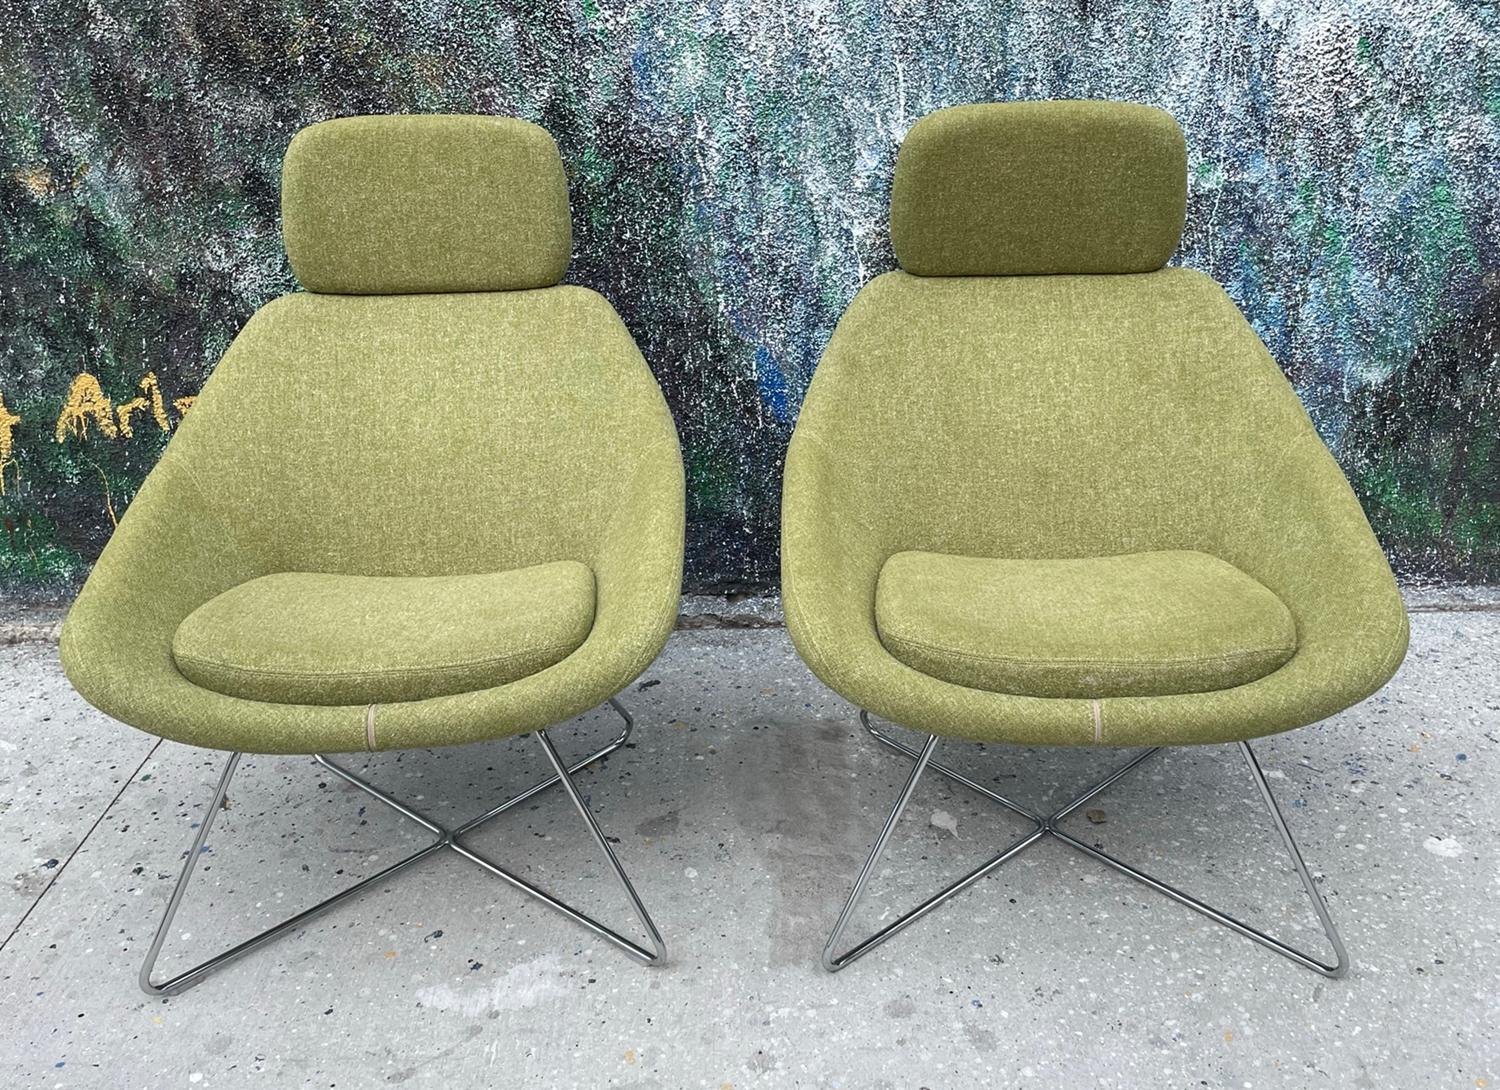 Beautiful pair of Lounge chairs designed and manufactured by Pearson Lloyd in the USA and sold through Allermuir.

The chairs are from the Open collection, model A643.
The chairs are very comfortable and light in weight which makes it easy to